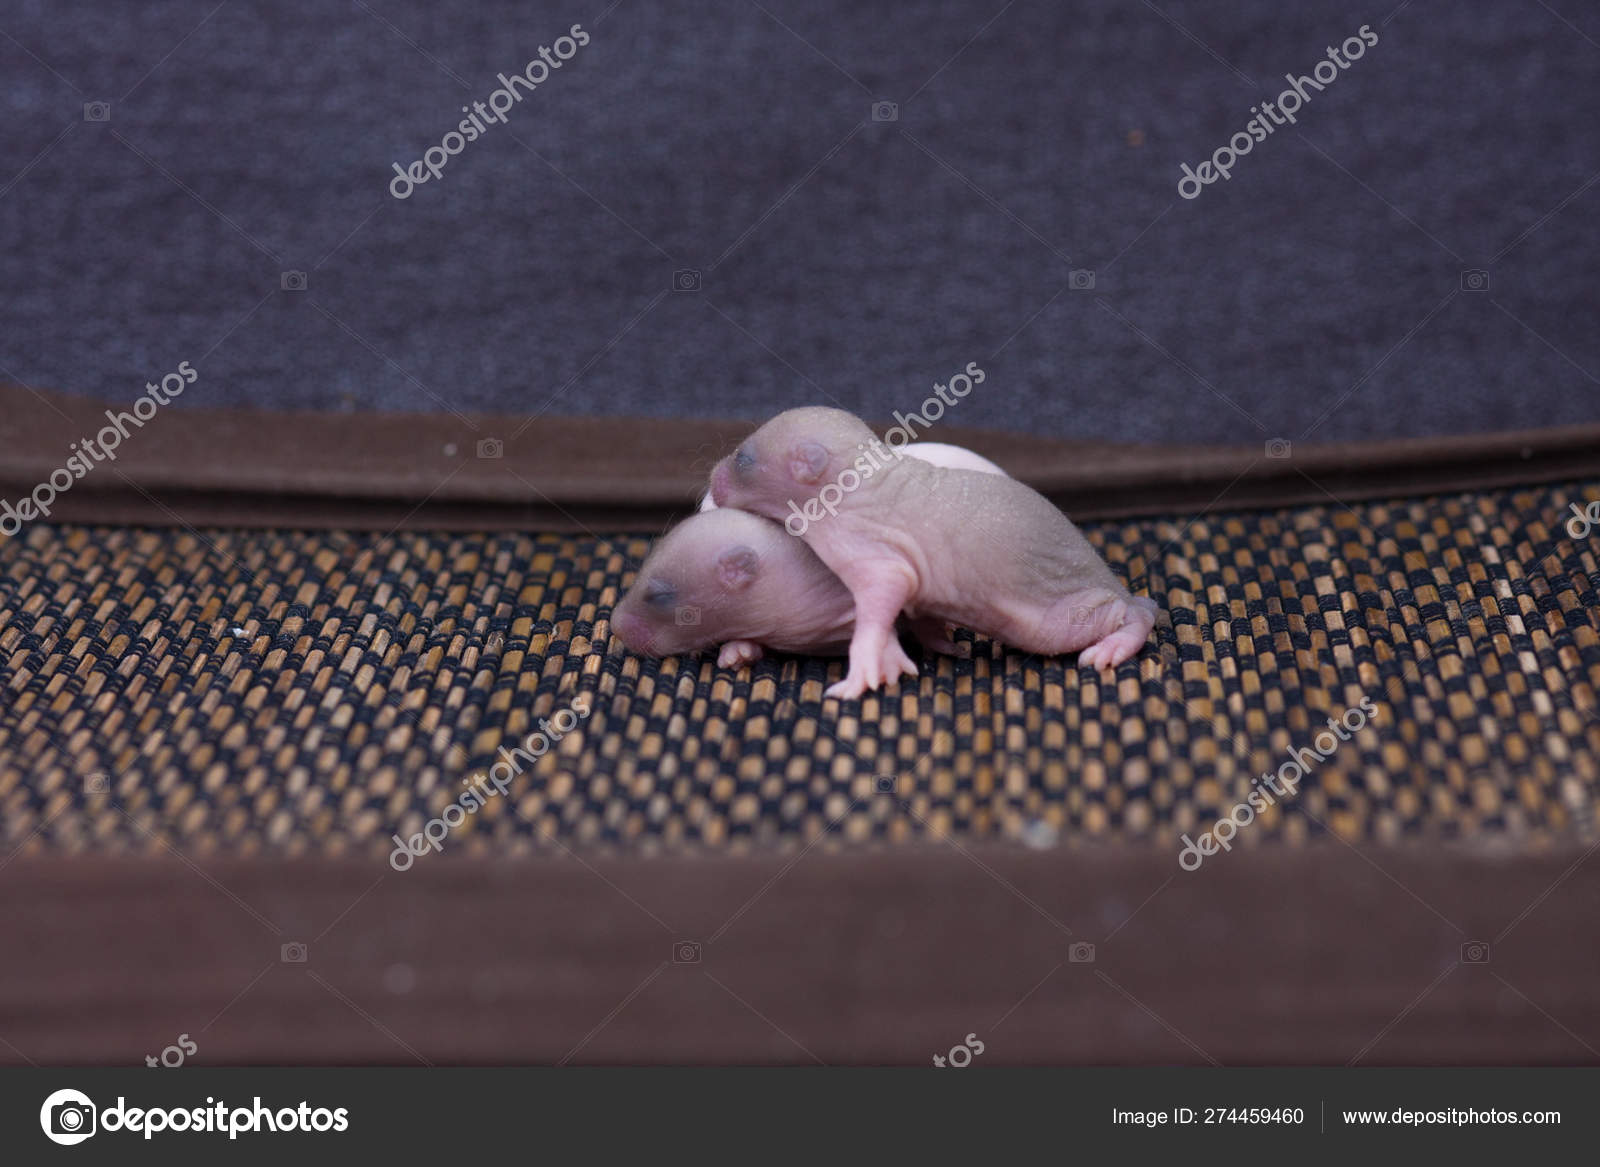 The Concept Of Wrinkles Newborn Baby Rats Are Sleeping Stock Photo Image By C Xxxenium7